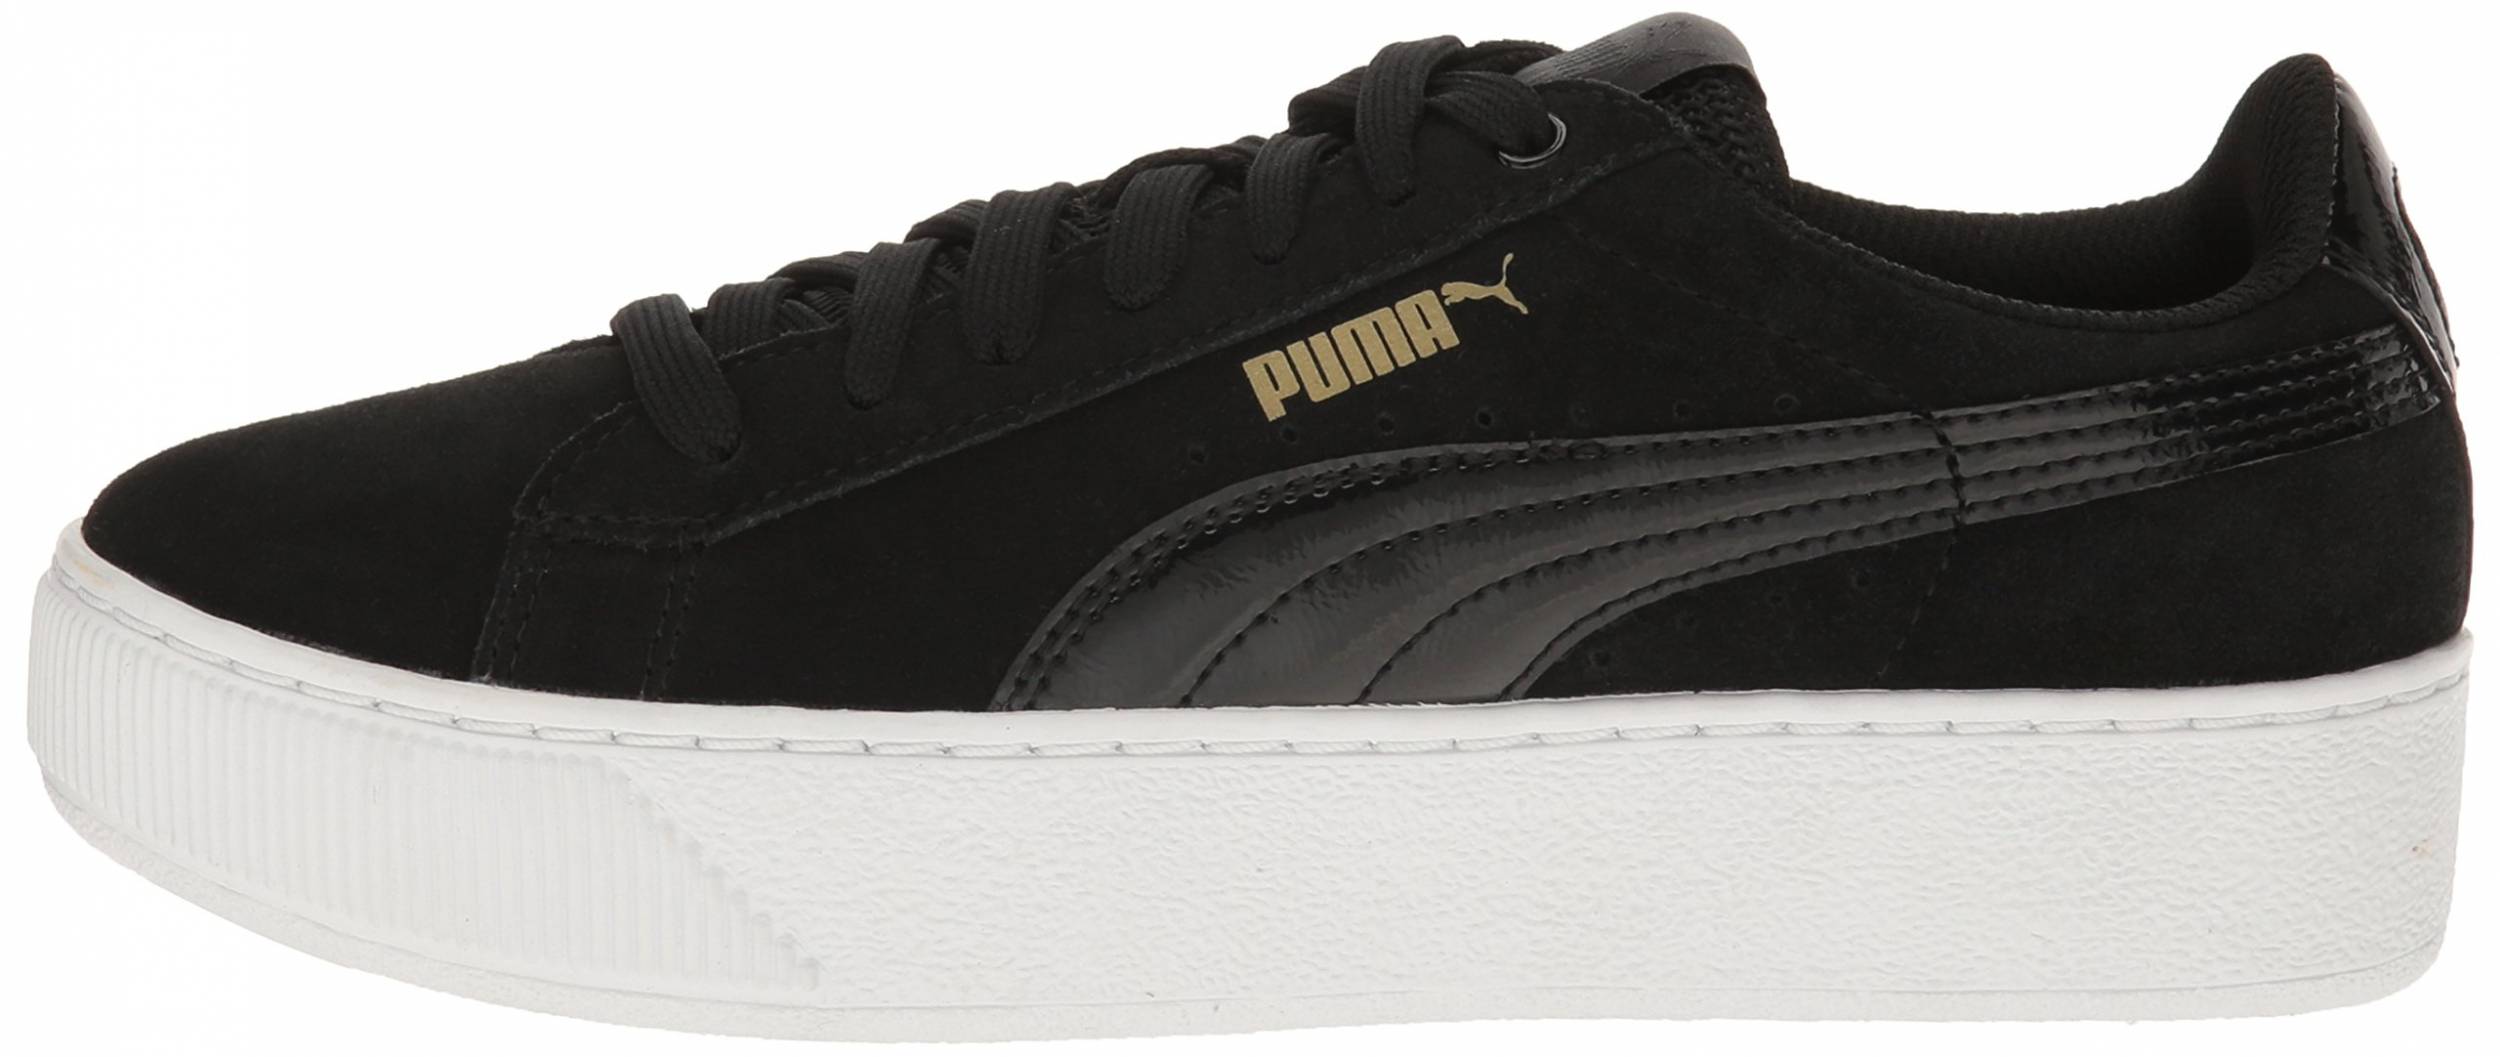 PUMA Platform sneakers (only $45) |